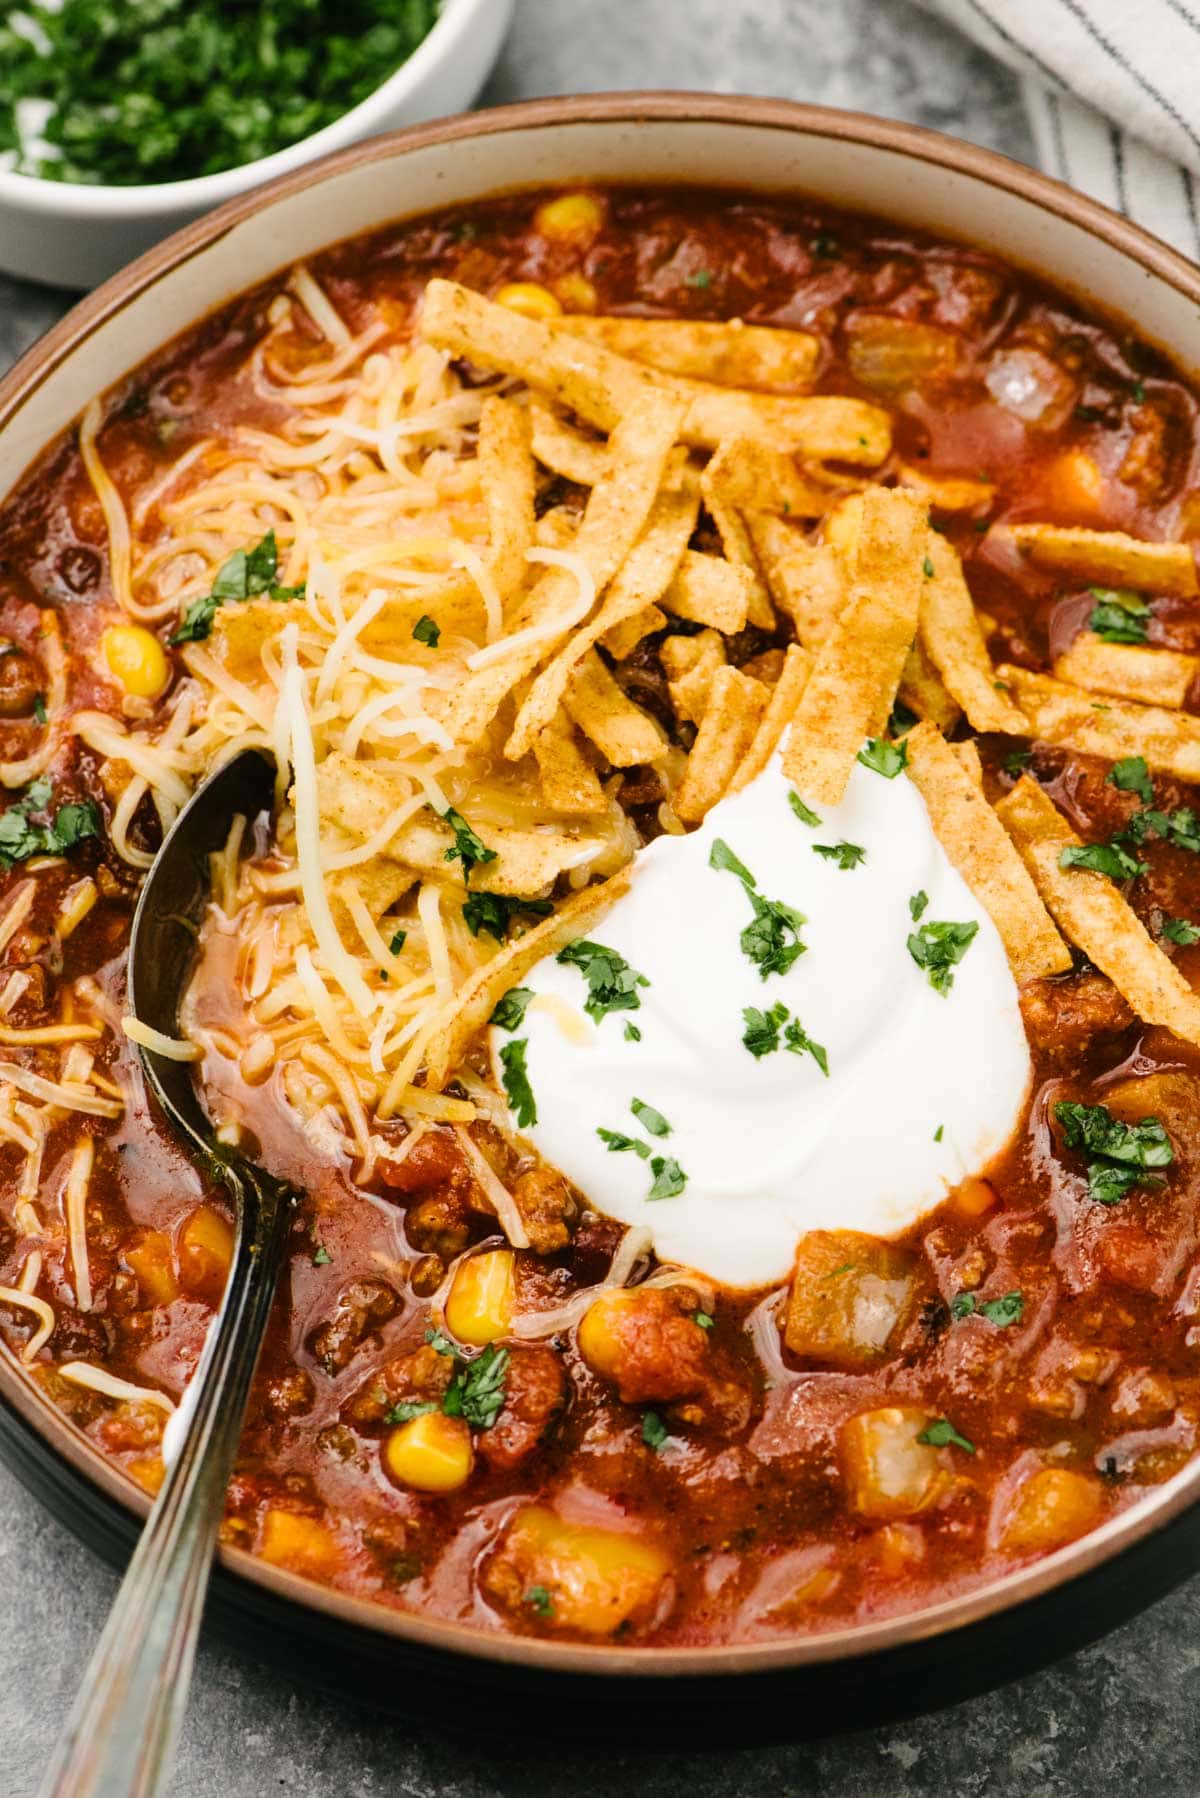 A soup spoon tucked into a bowl of crockpot taco soup, garnished with sour cream, shredded cheese, tortilla strips, and chopped cilantro; a small bowl of chopped cilantro and a striped linen napkin are in the background.